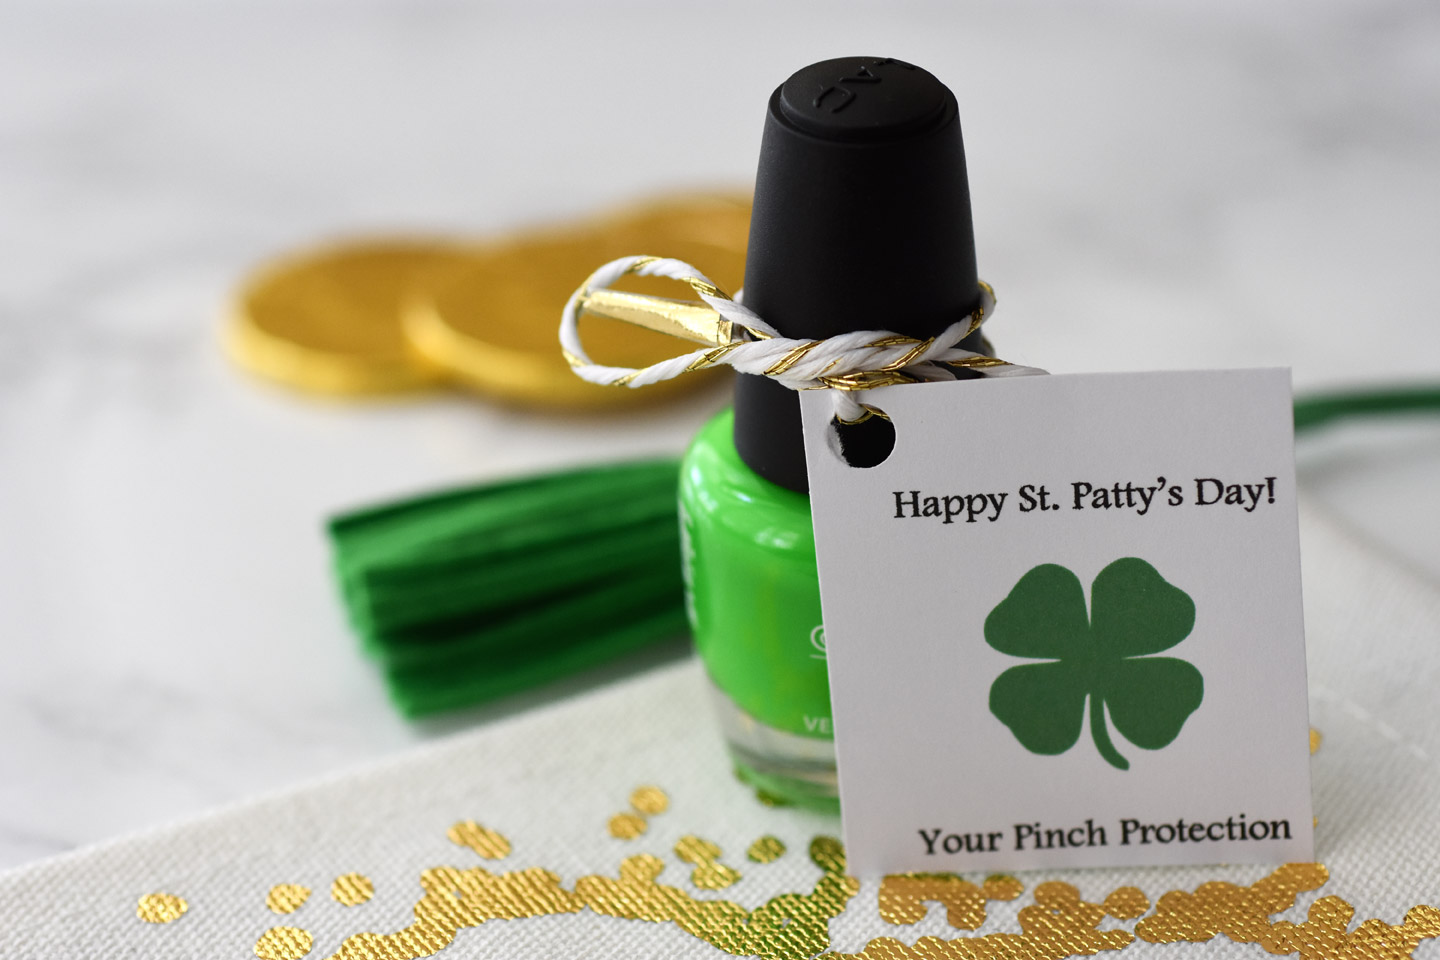 Pinch Protection Gifts for St. Patty's Day by Happy Family Blog